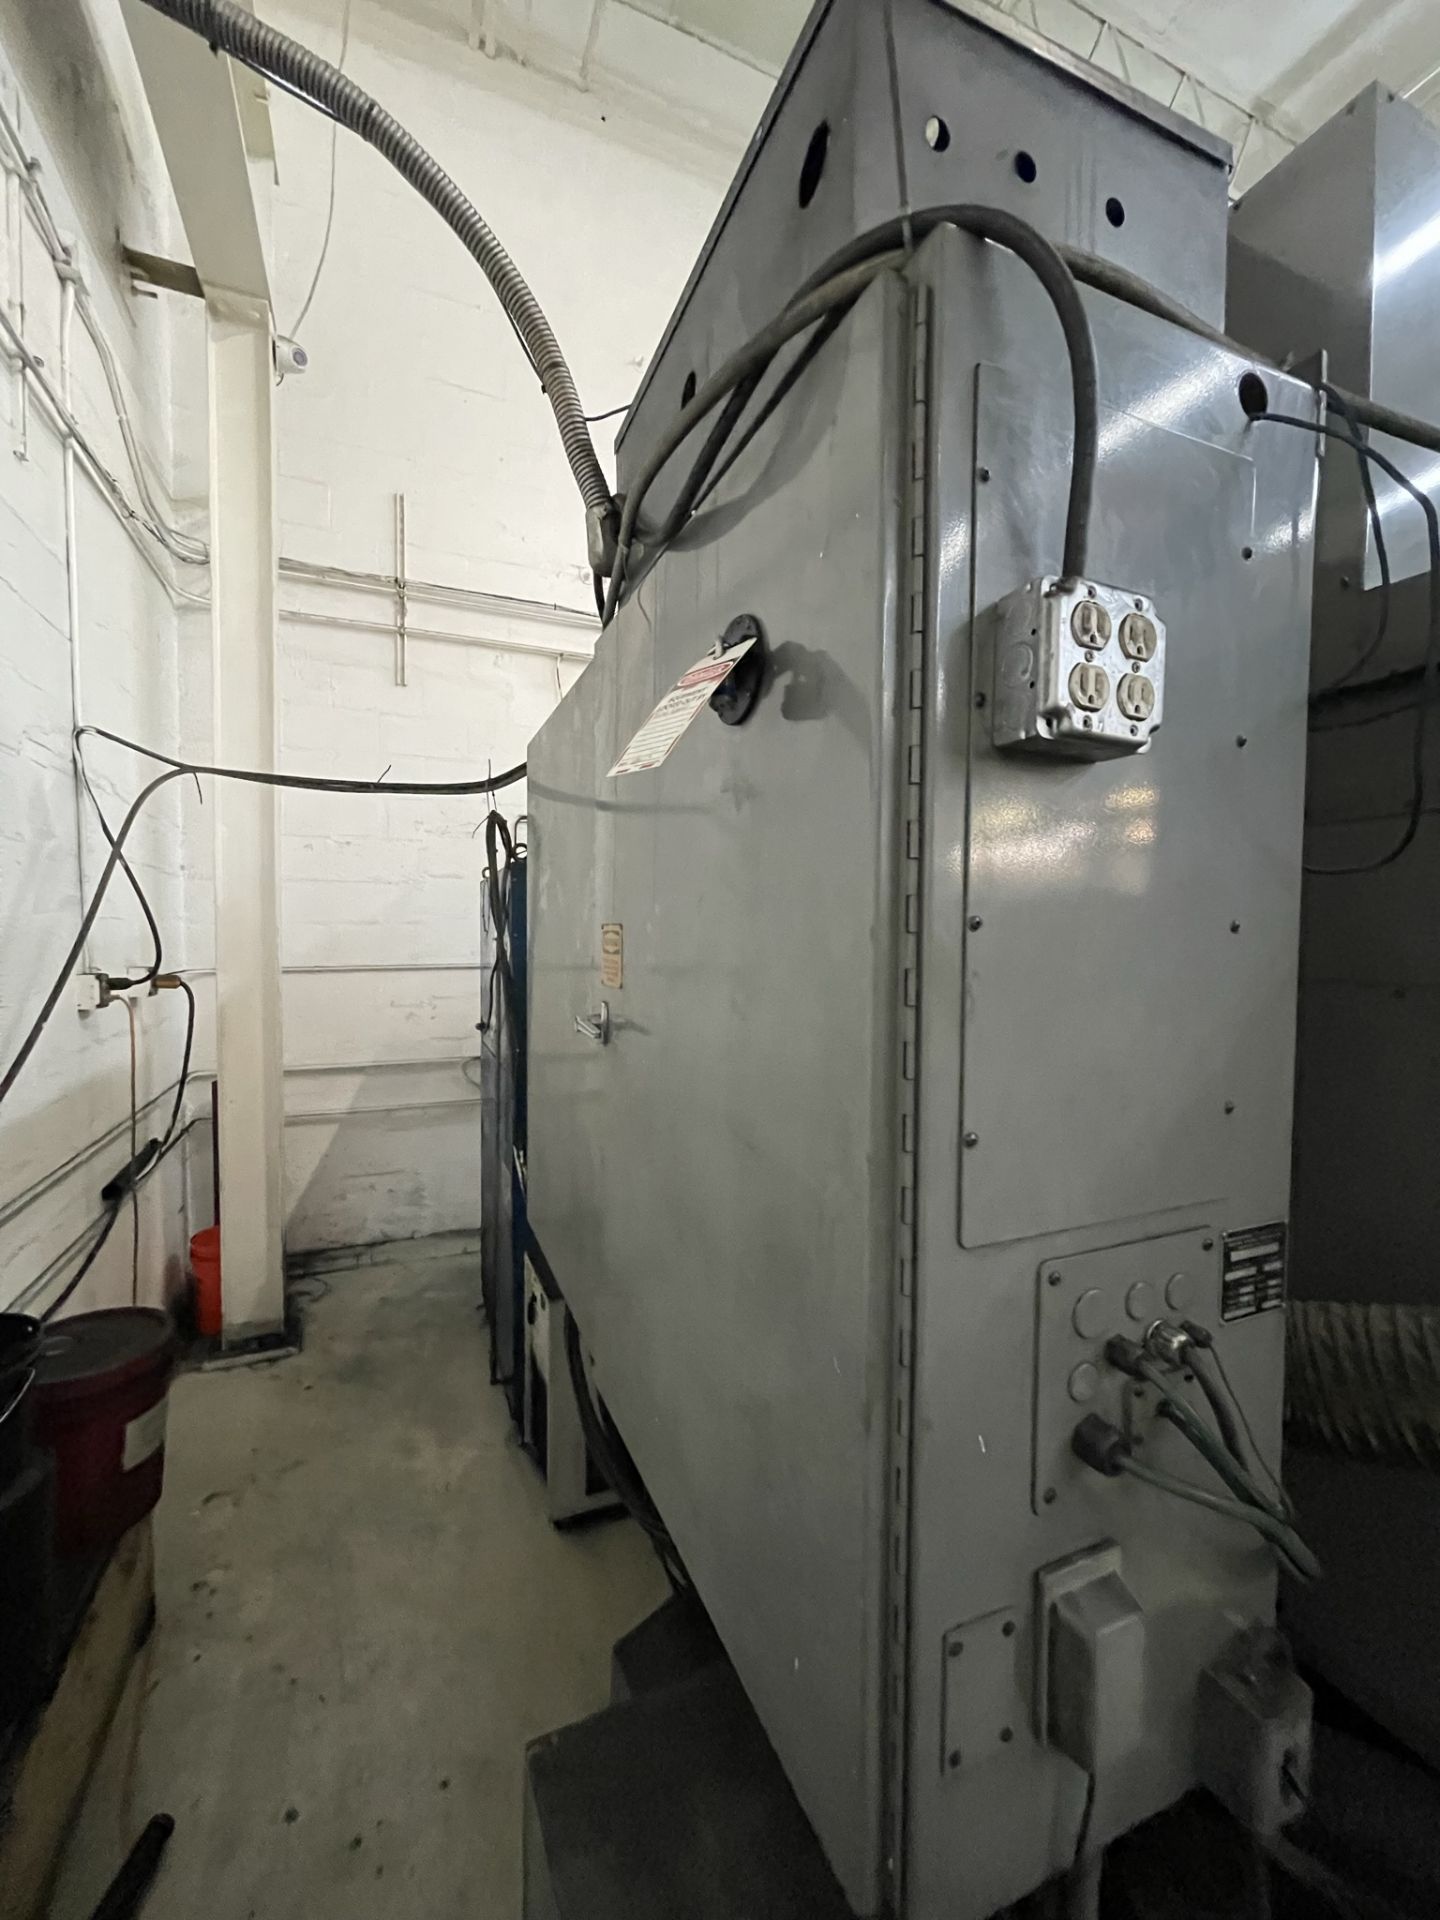 1995 Bostomatic BD32-G CNC Vertical Machining Center - Image 7 of 7